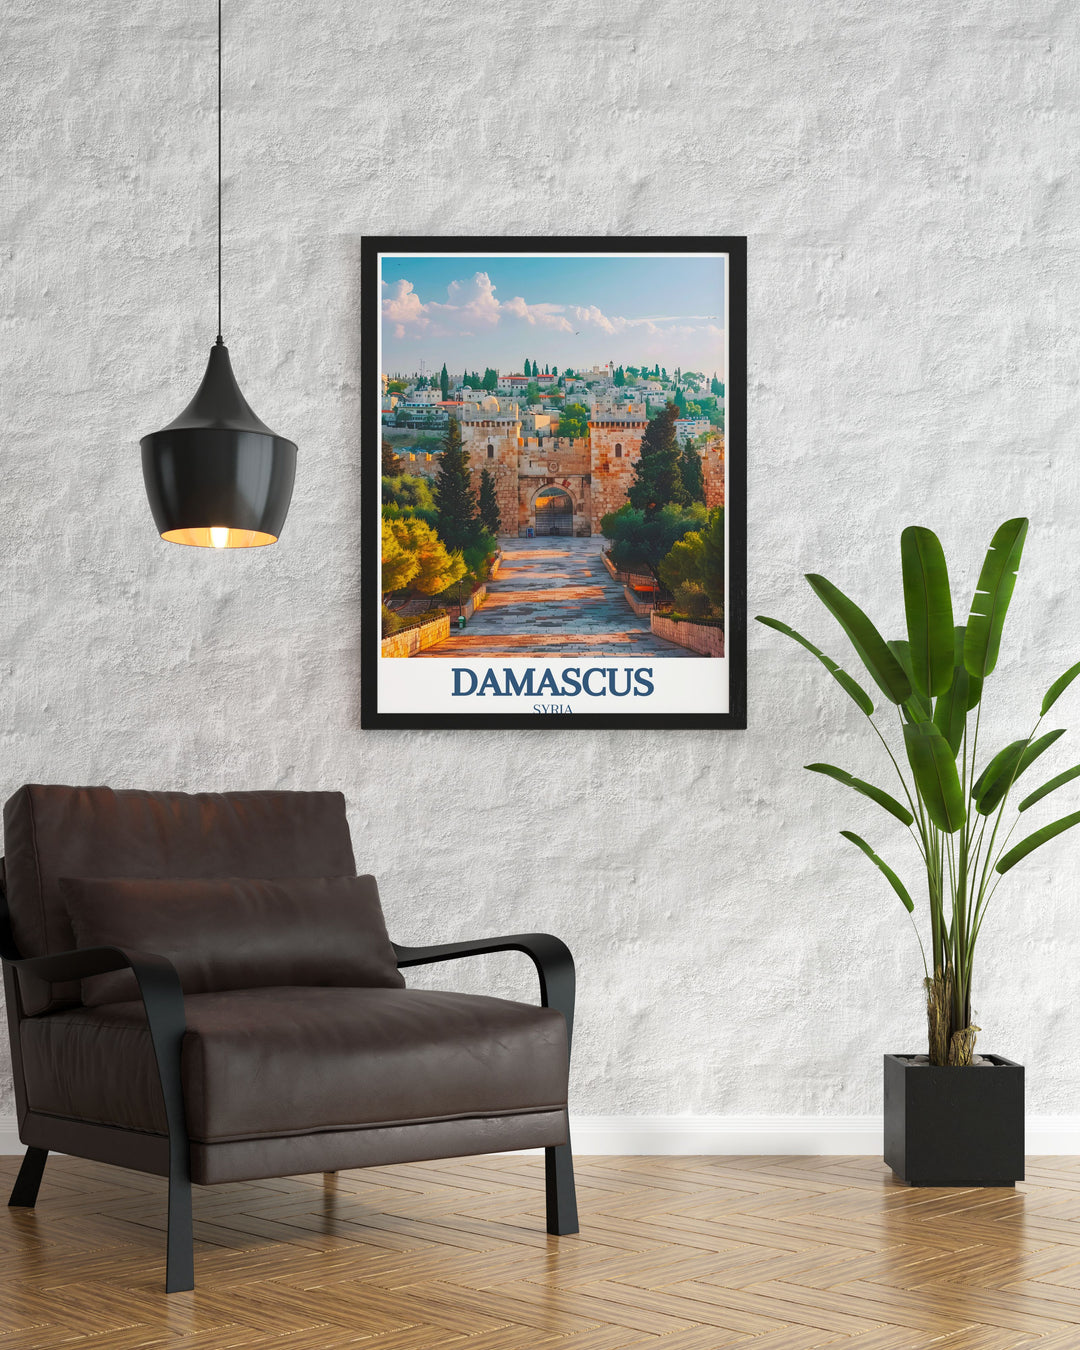 Gallery wall art featuring the majestic Bab al Amara gate, a symbol of Damascuss rich history and architectural beauty.